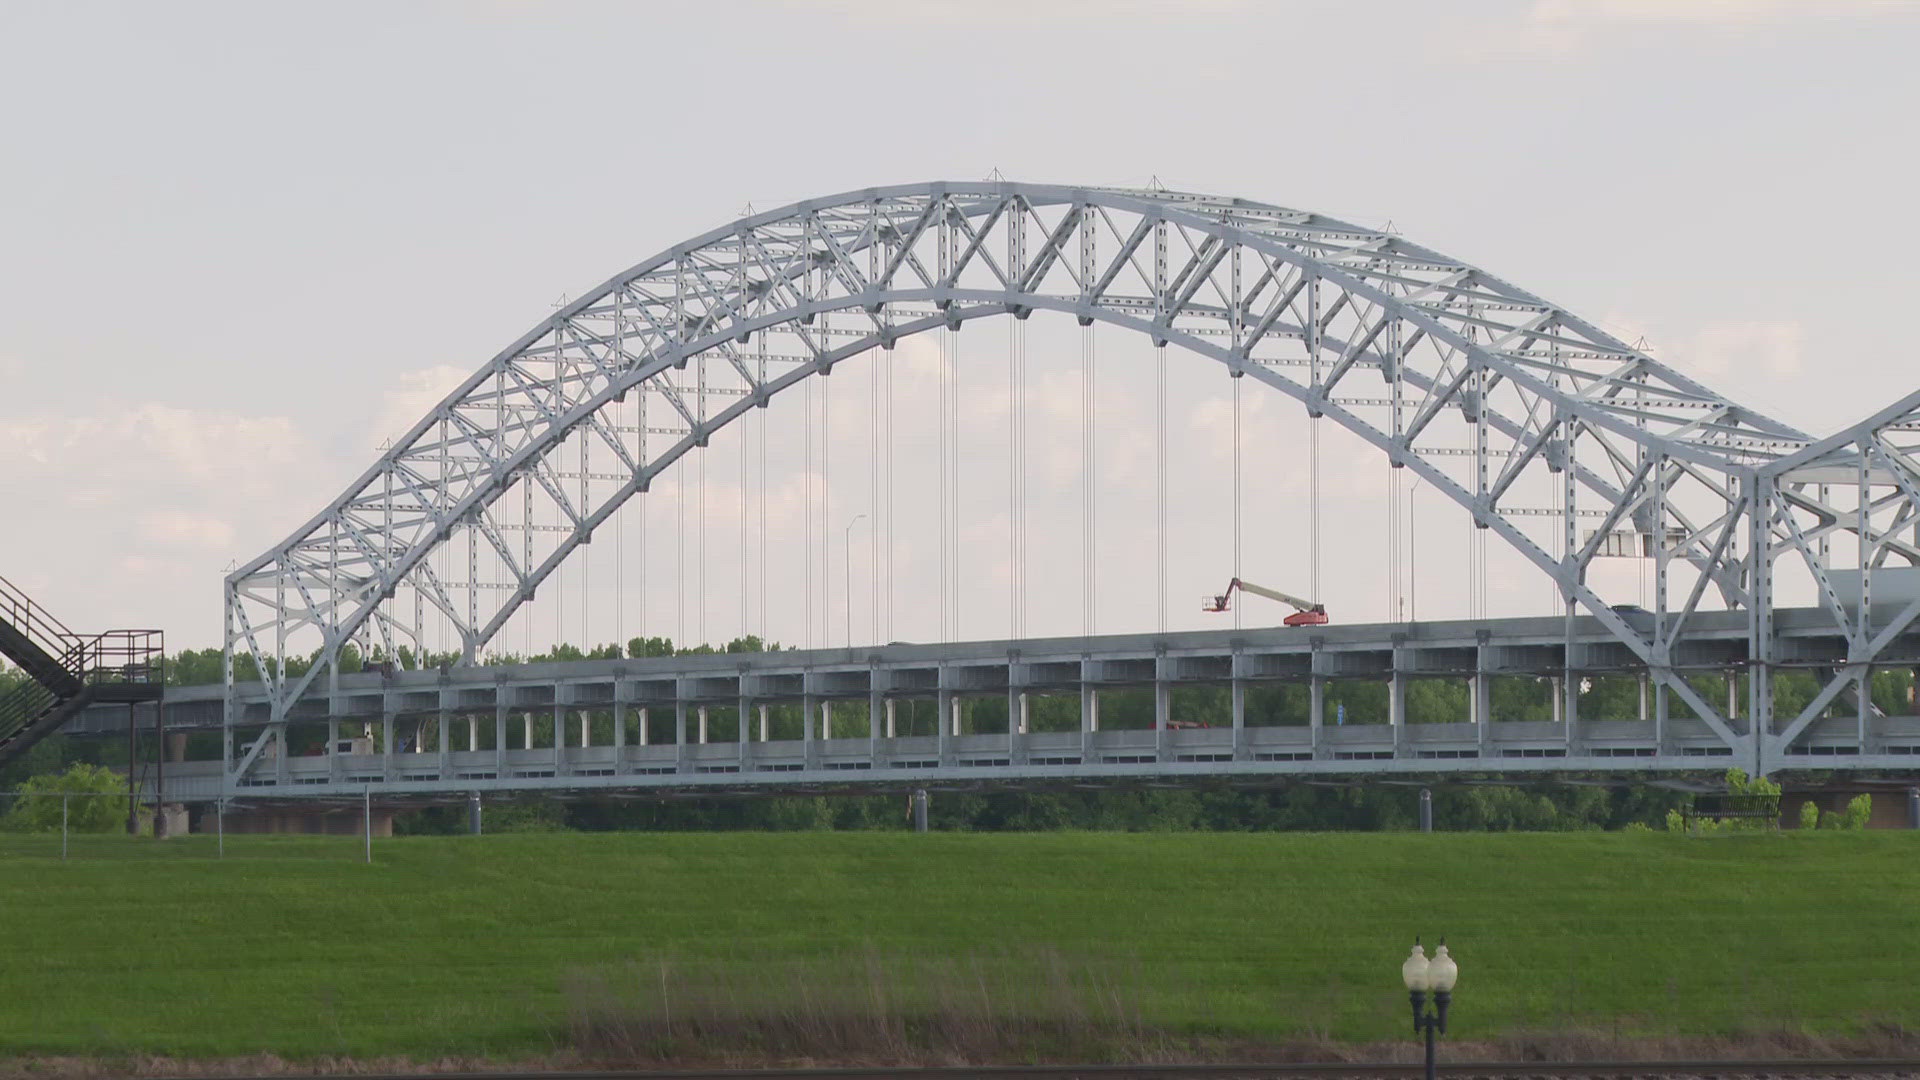 For the last two weeks, the closure of the eastbound lanes has caused headaches for drivers. The bridge is expected to reopen the lanes Monday at 5 a.m.